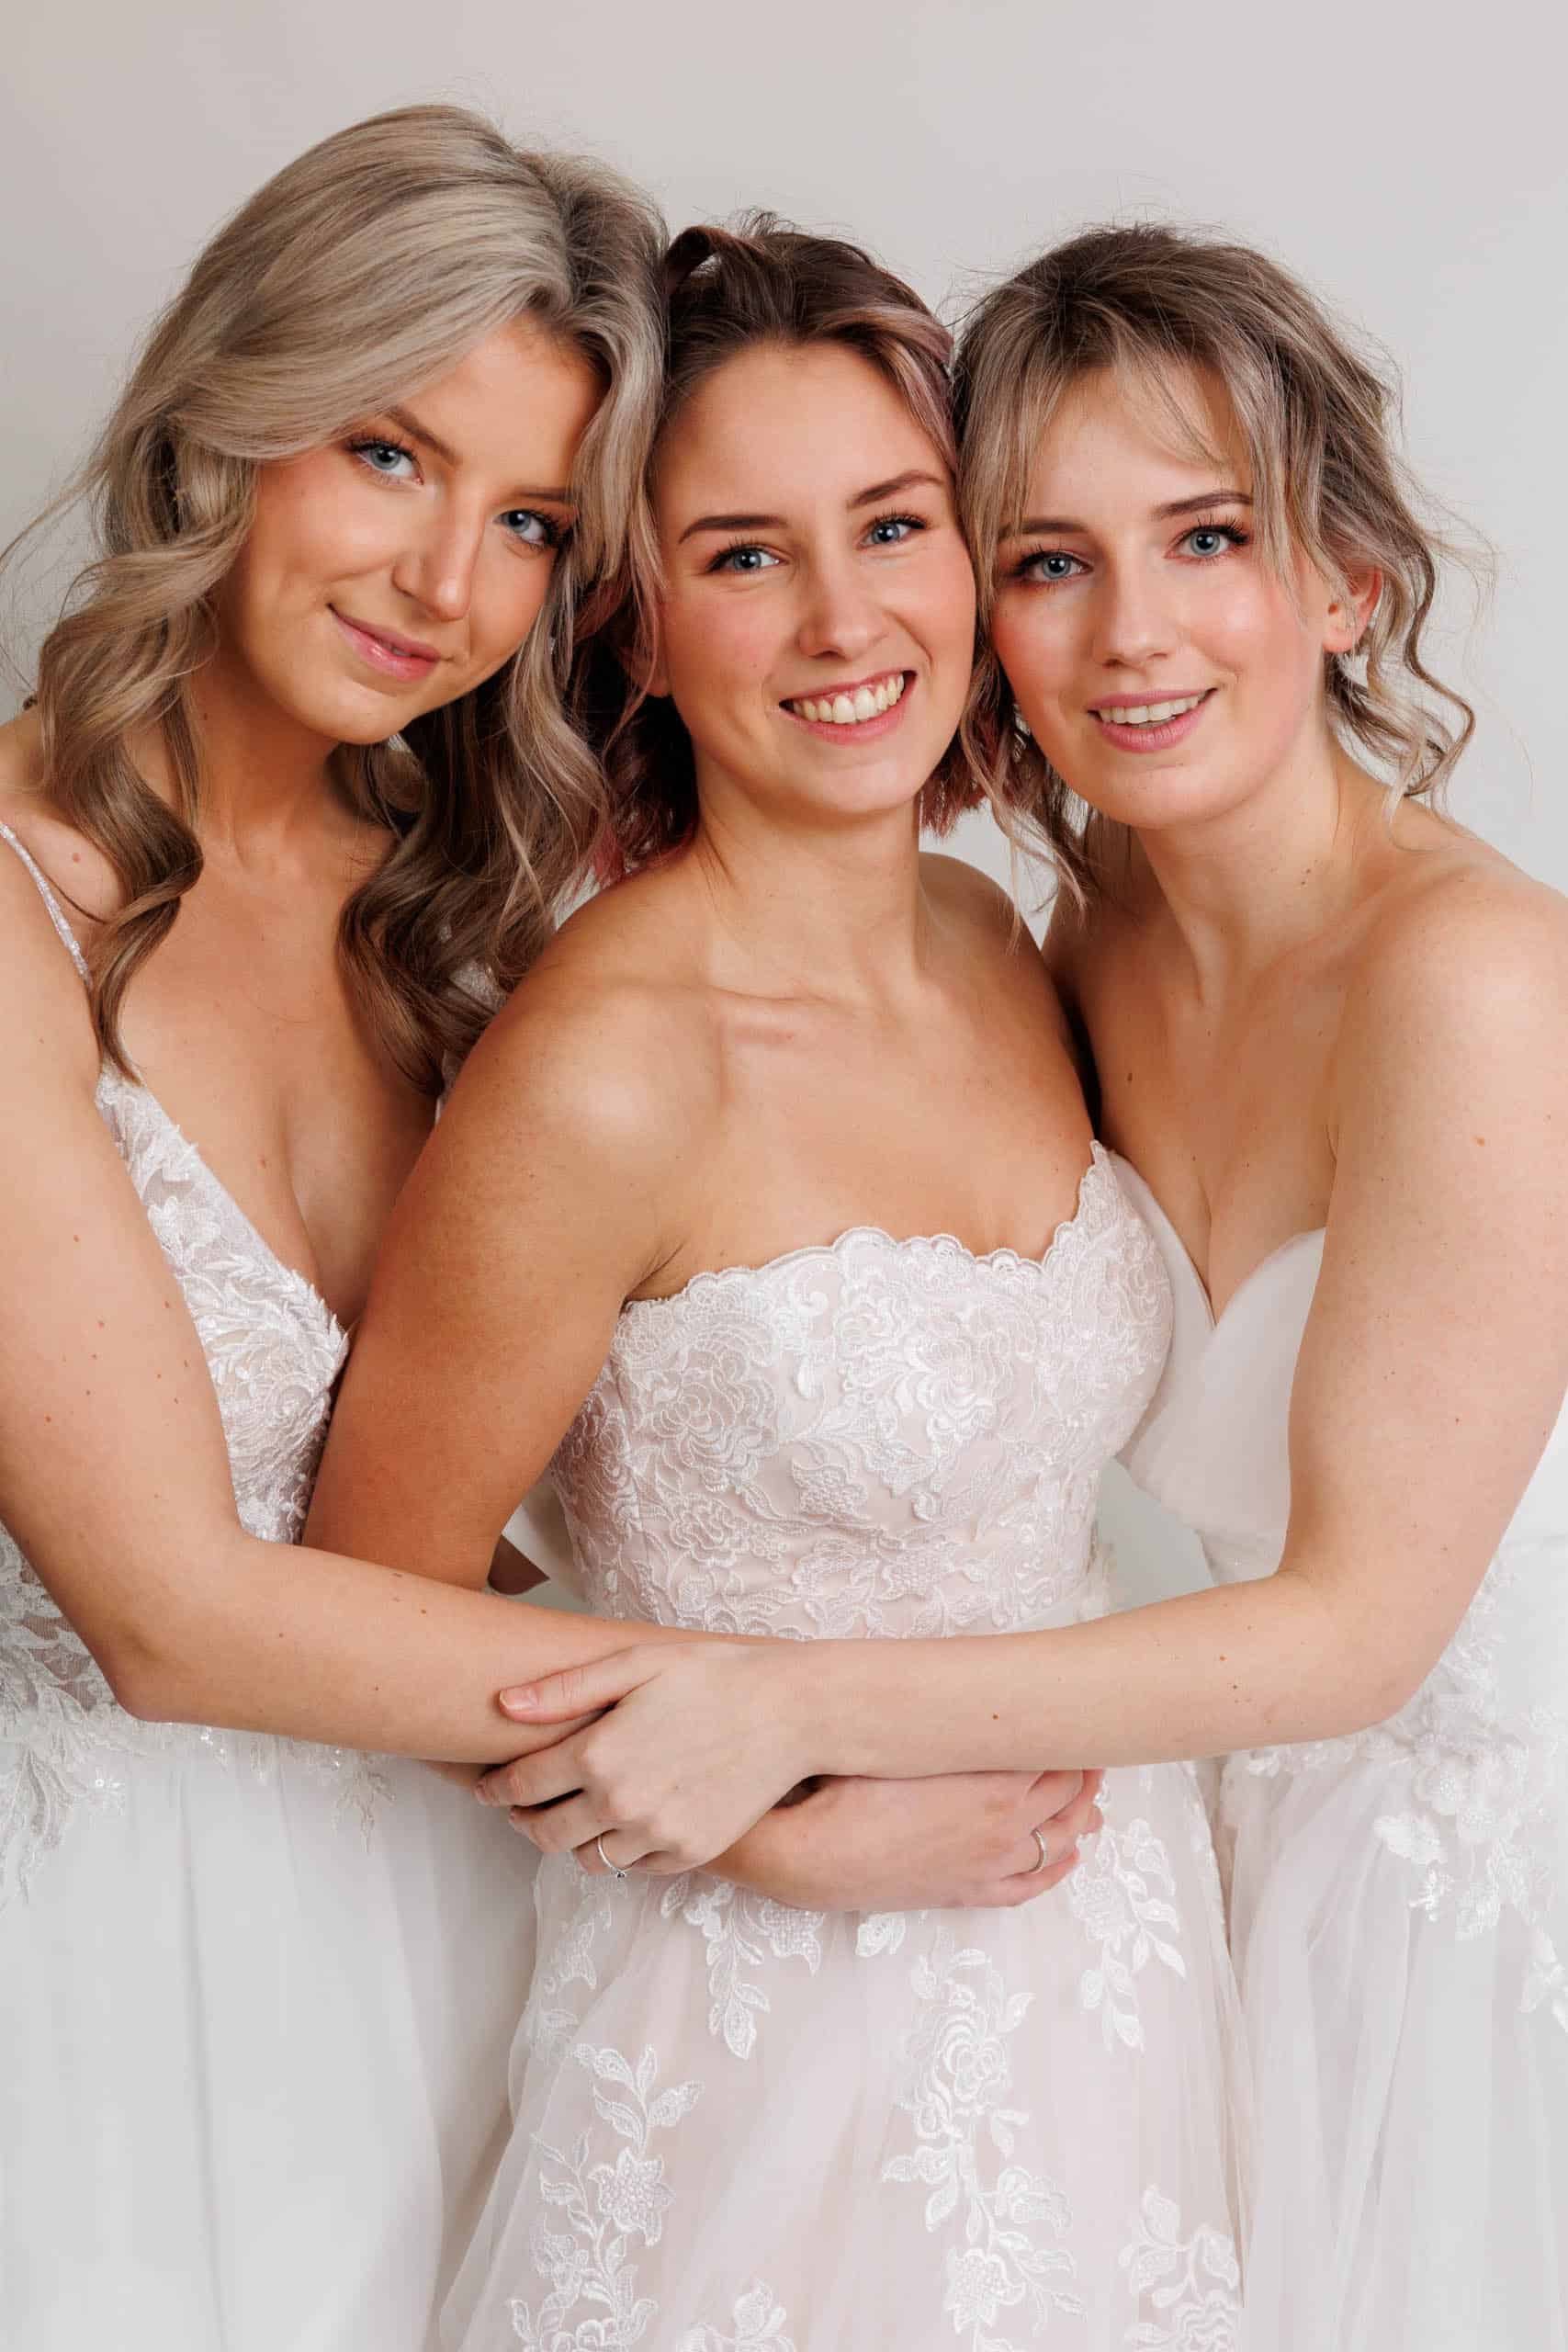 Three bridesmaids try on wedding dresses for fun while posing for a photo.